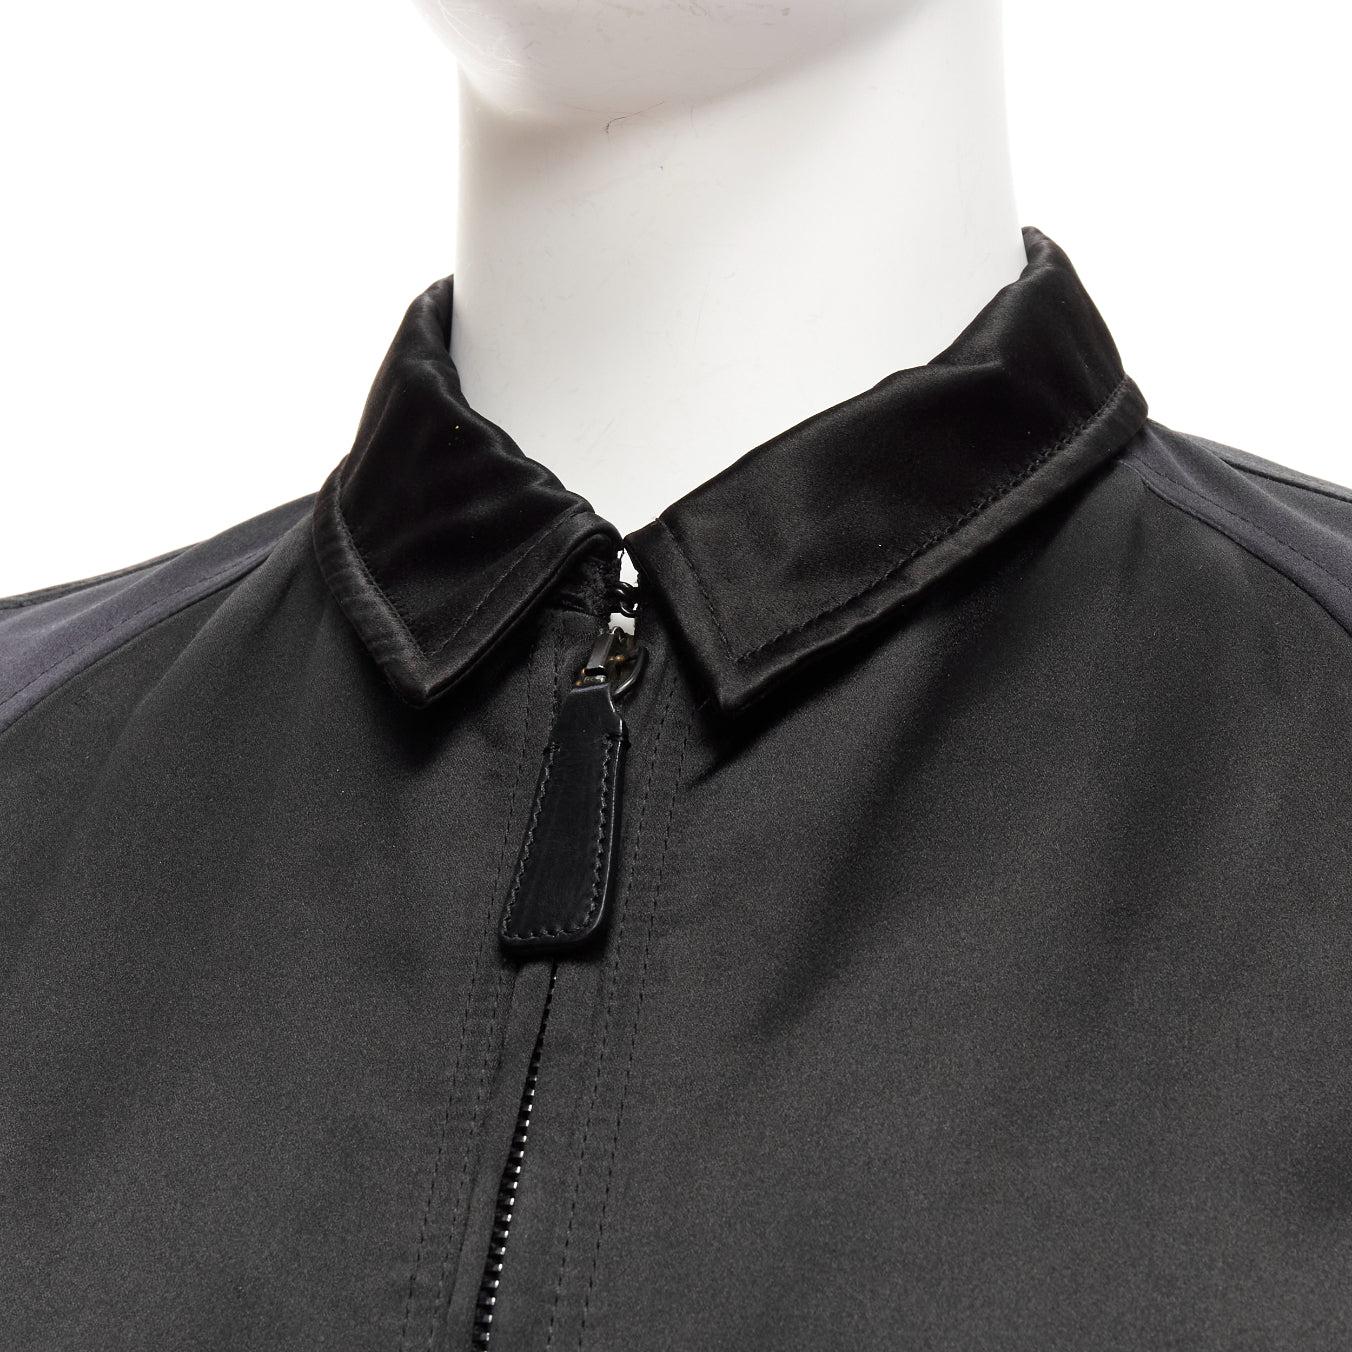 BURBERRY PRORSUM black navy satin raglan bomber jacket IT46 S
Reference: MLCO/A00006
Brand: Burberry
Designer: Christopher Bailey
Material: Viscose, Blend
Color: Black, Navy
Pattern: Solid
Closure: Zip
Lining: Black Fabric
Extra Details: Burberry